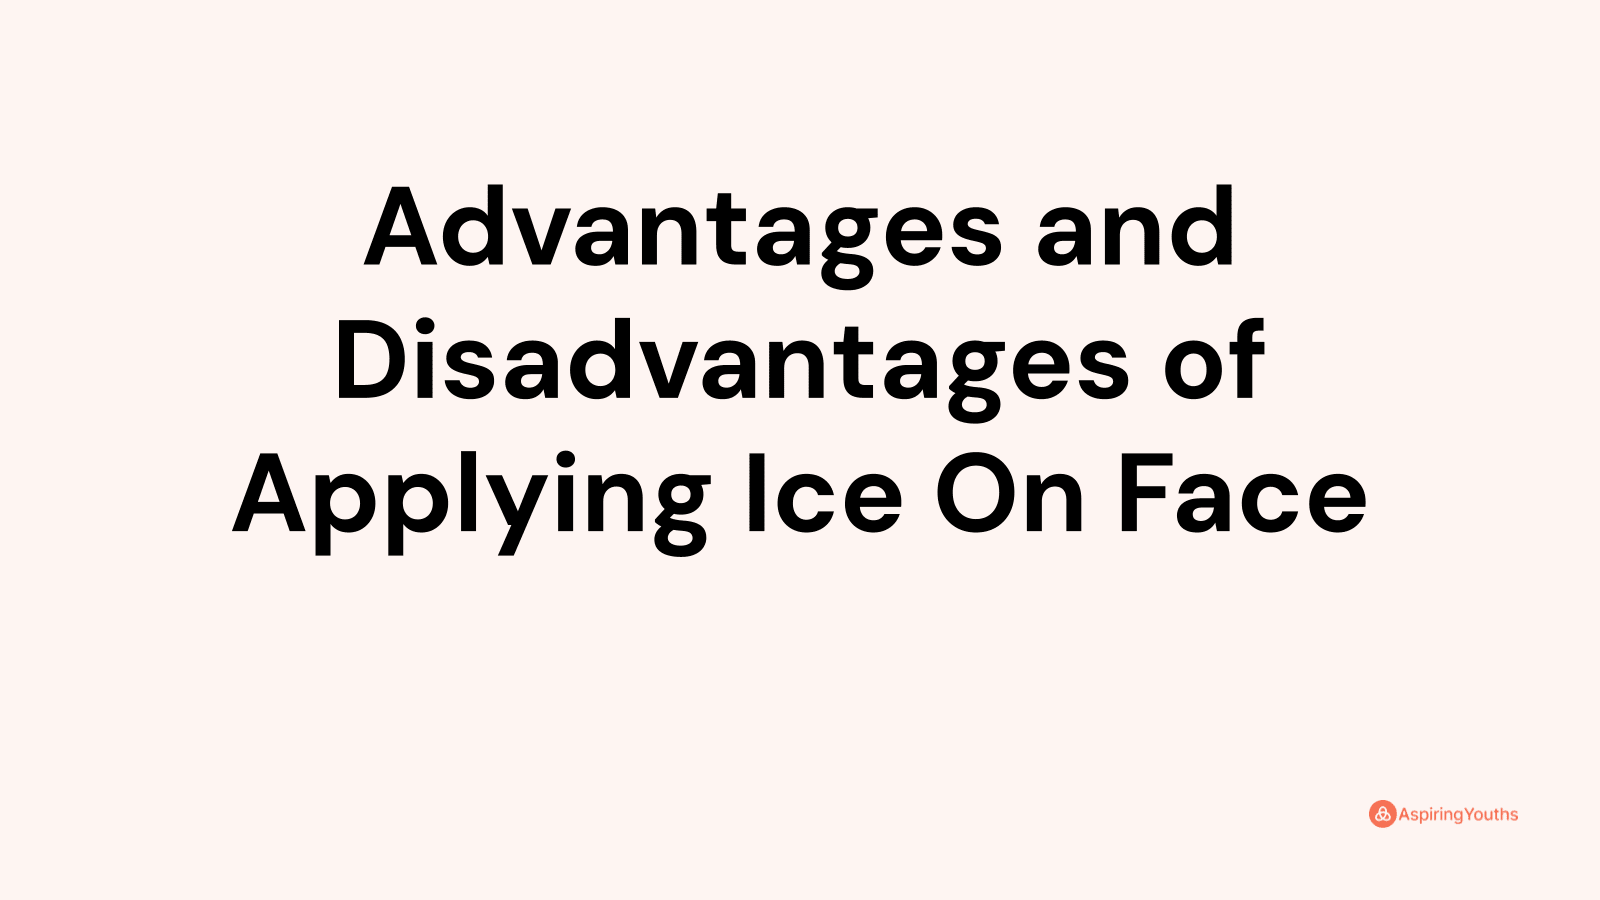 Advantages and disadvantages of Applying Ice On Face